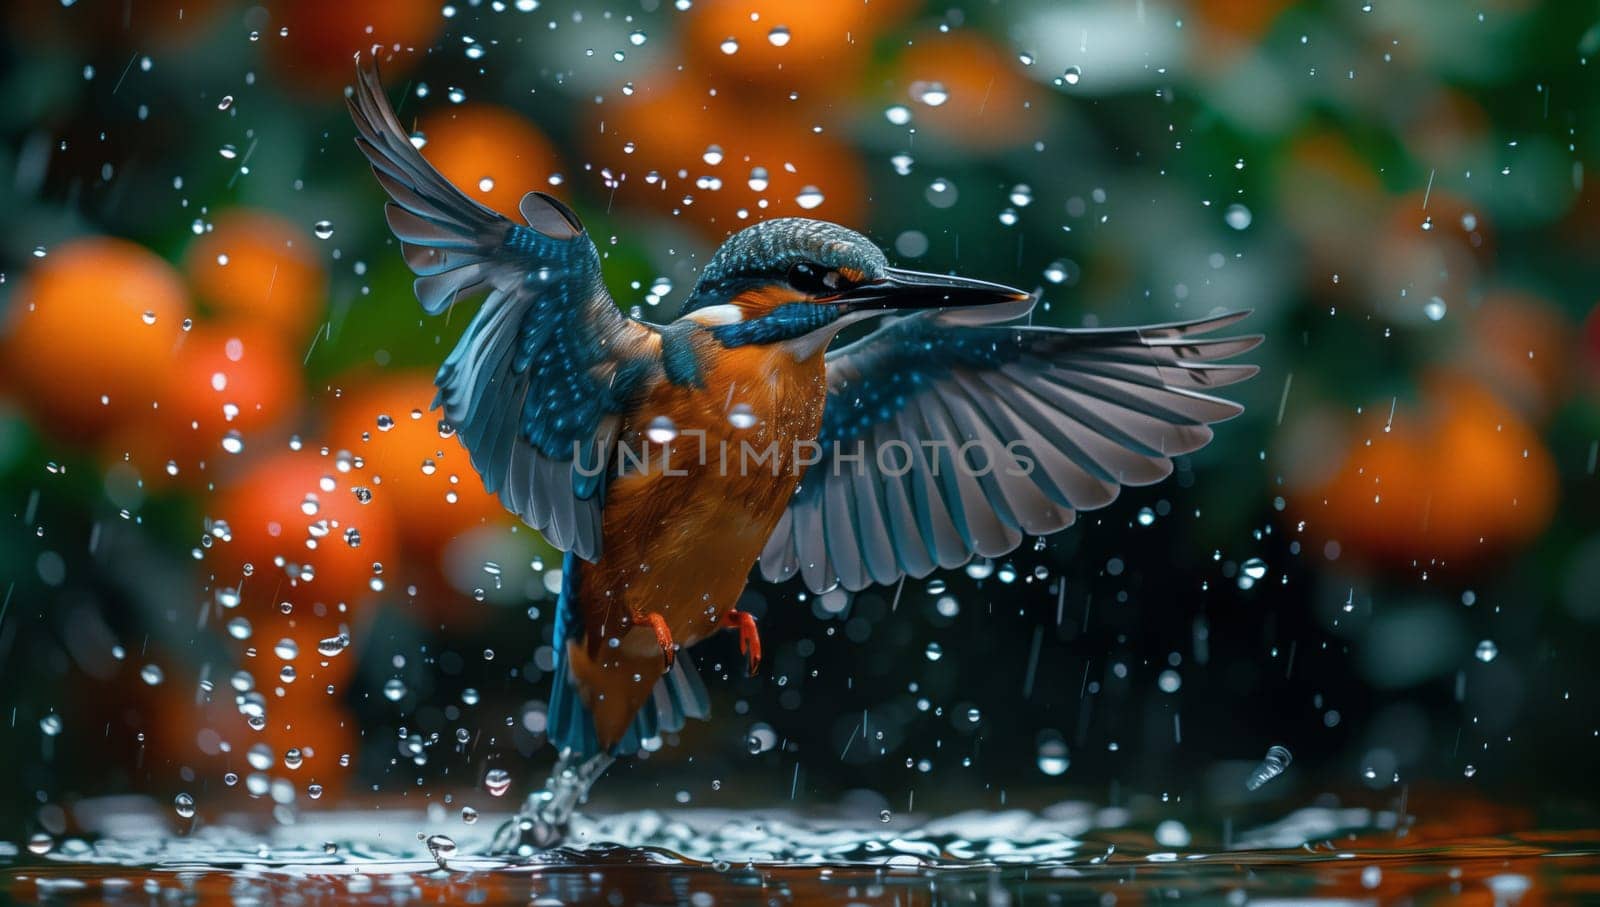 An electric blue bird with wet feathers is gracefully flying over a body of water in the rain, showcasing the beauty of wildlife in this natural event